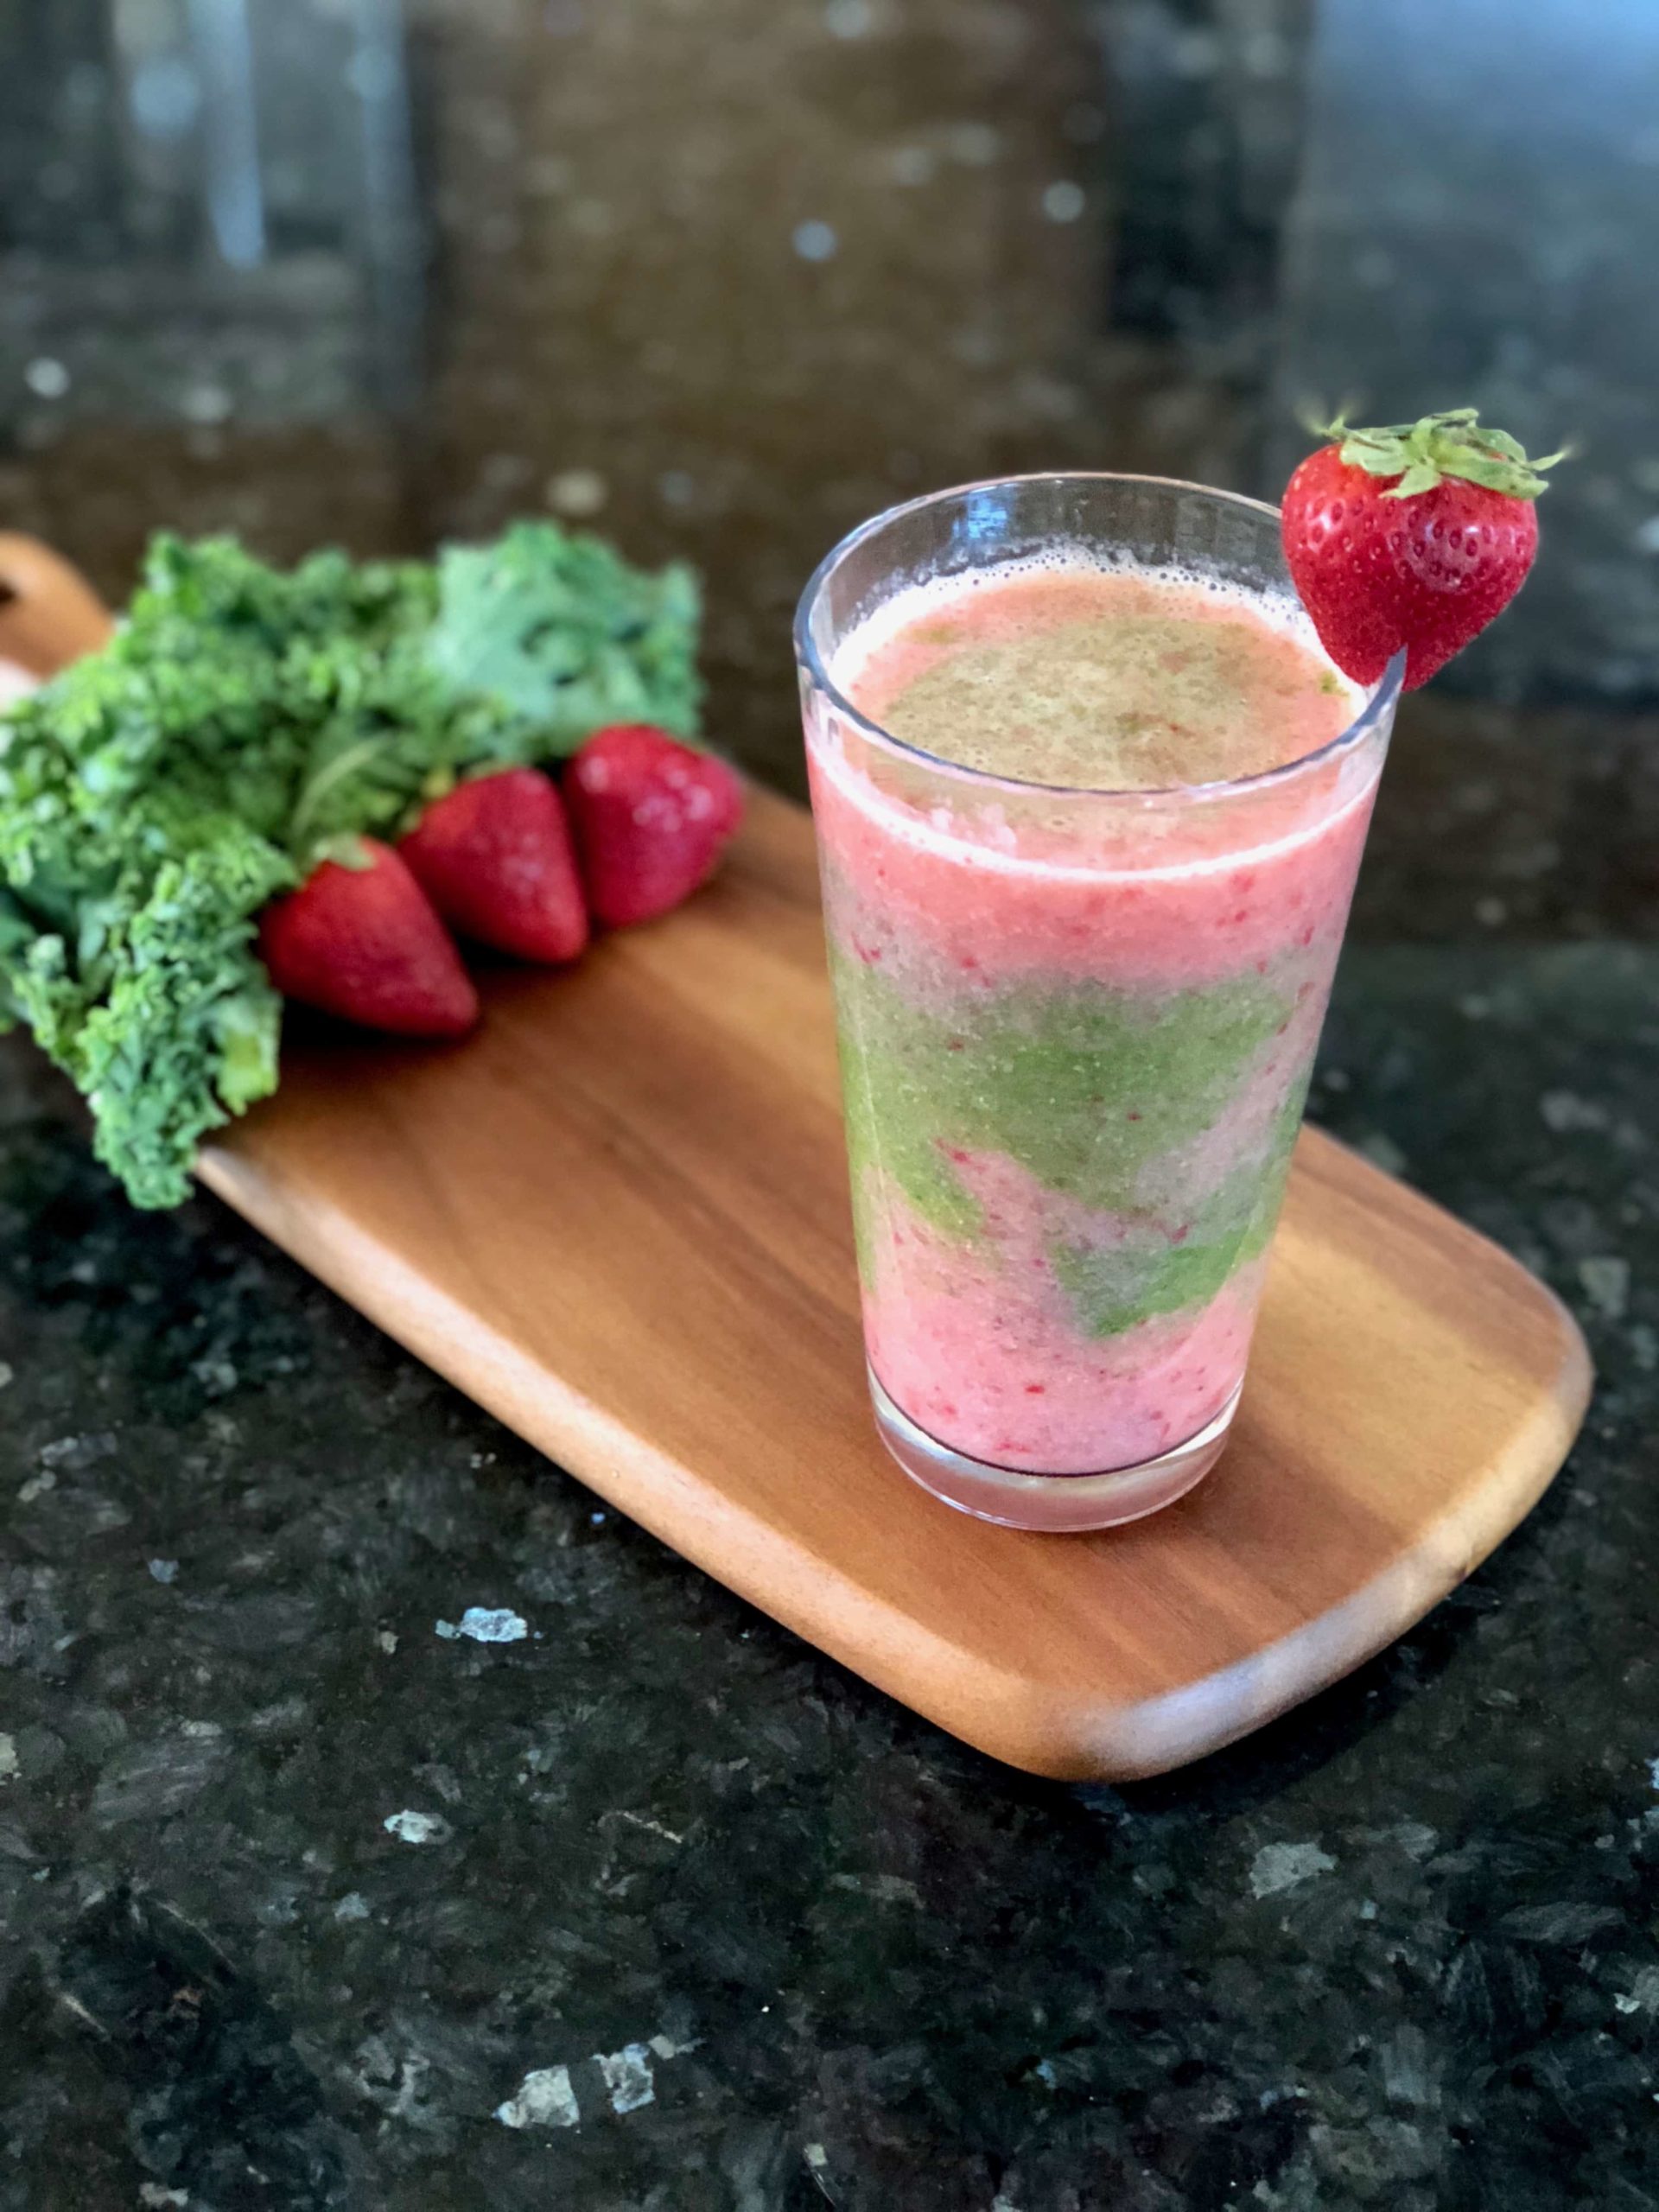 Impress your friends with this beautiful Strawberry Kale Smoothie! The mix between the sweet pineapple, strawberry, and kale makes for the perfect, slightly-sweet smoothie combo.